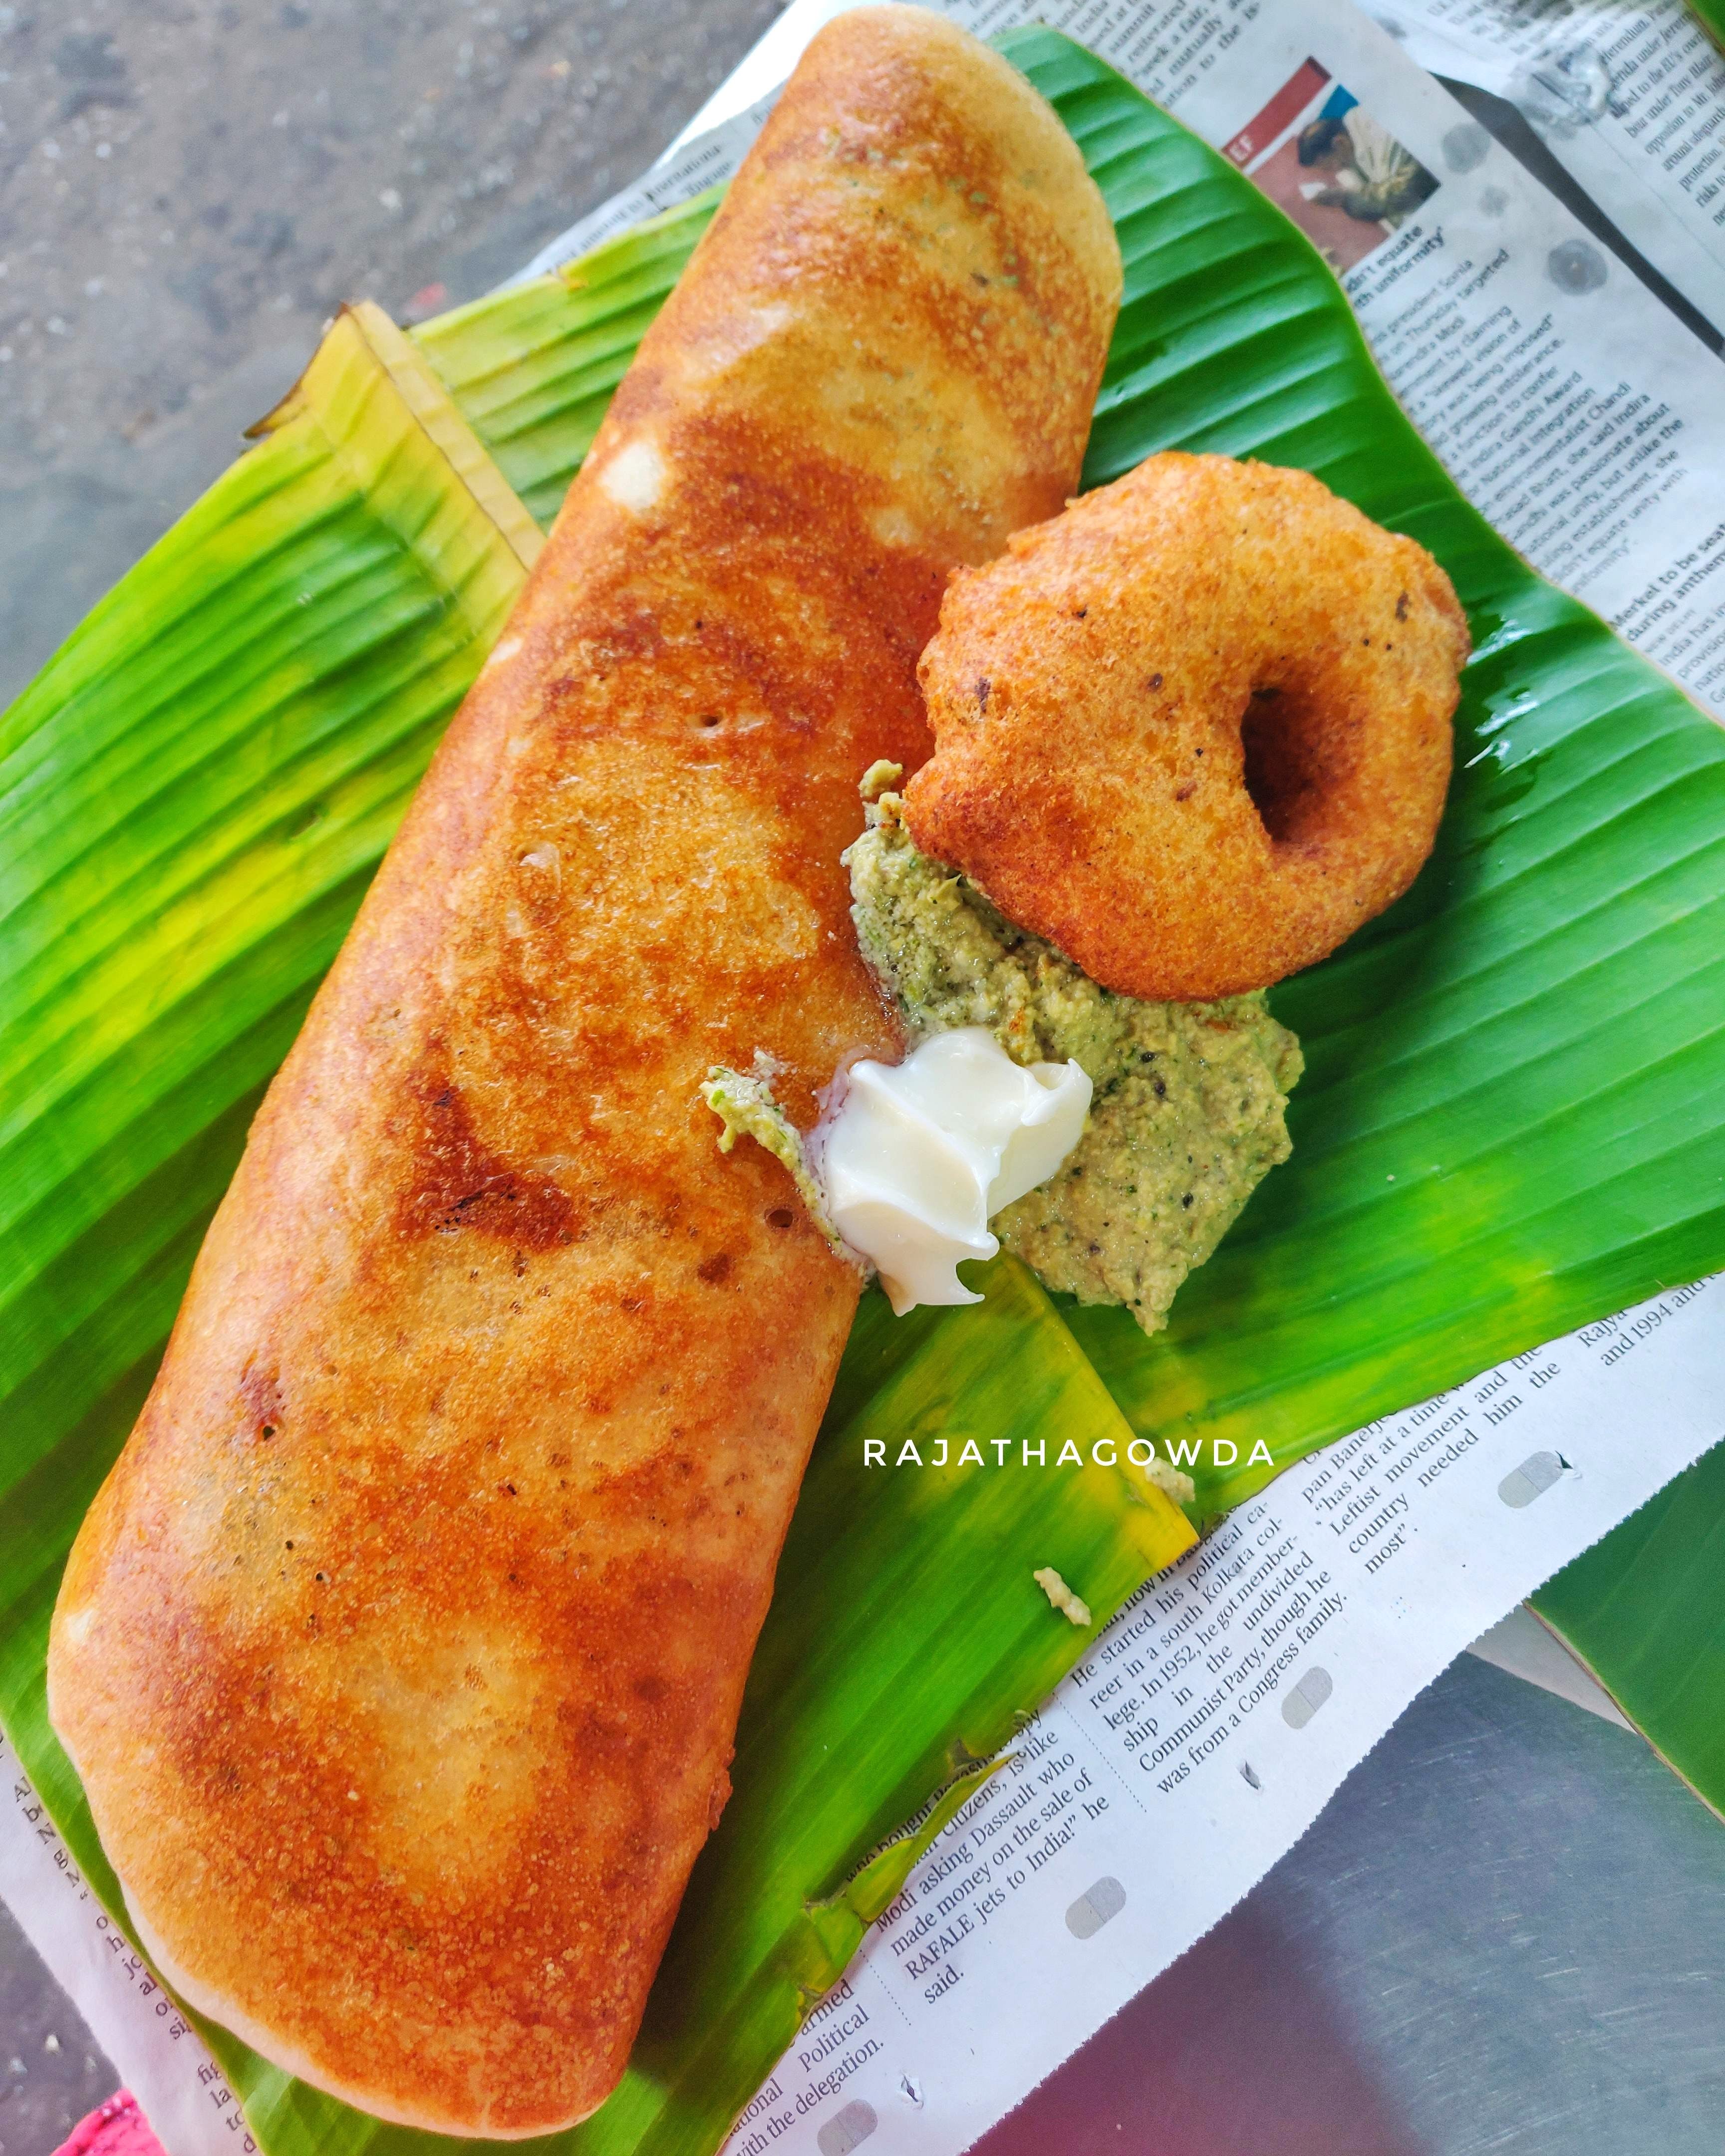 Dish,Food,Cuisine,Ingredient,Produce,Fried food,Dosa,Baked goods,Indian cuisine